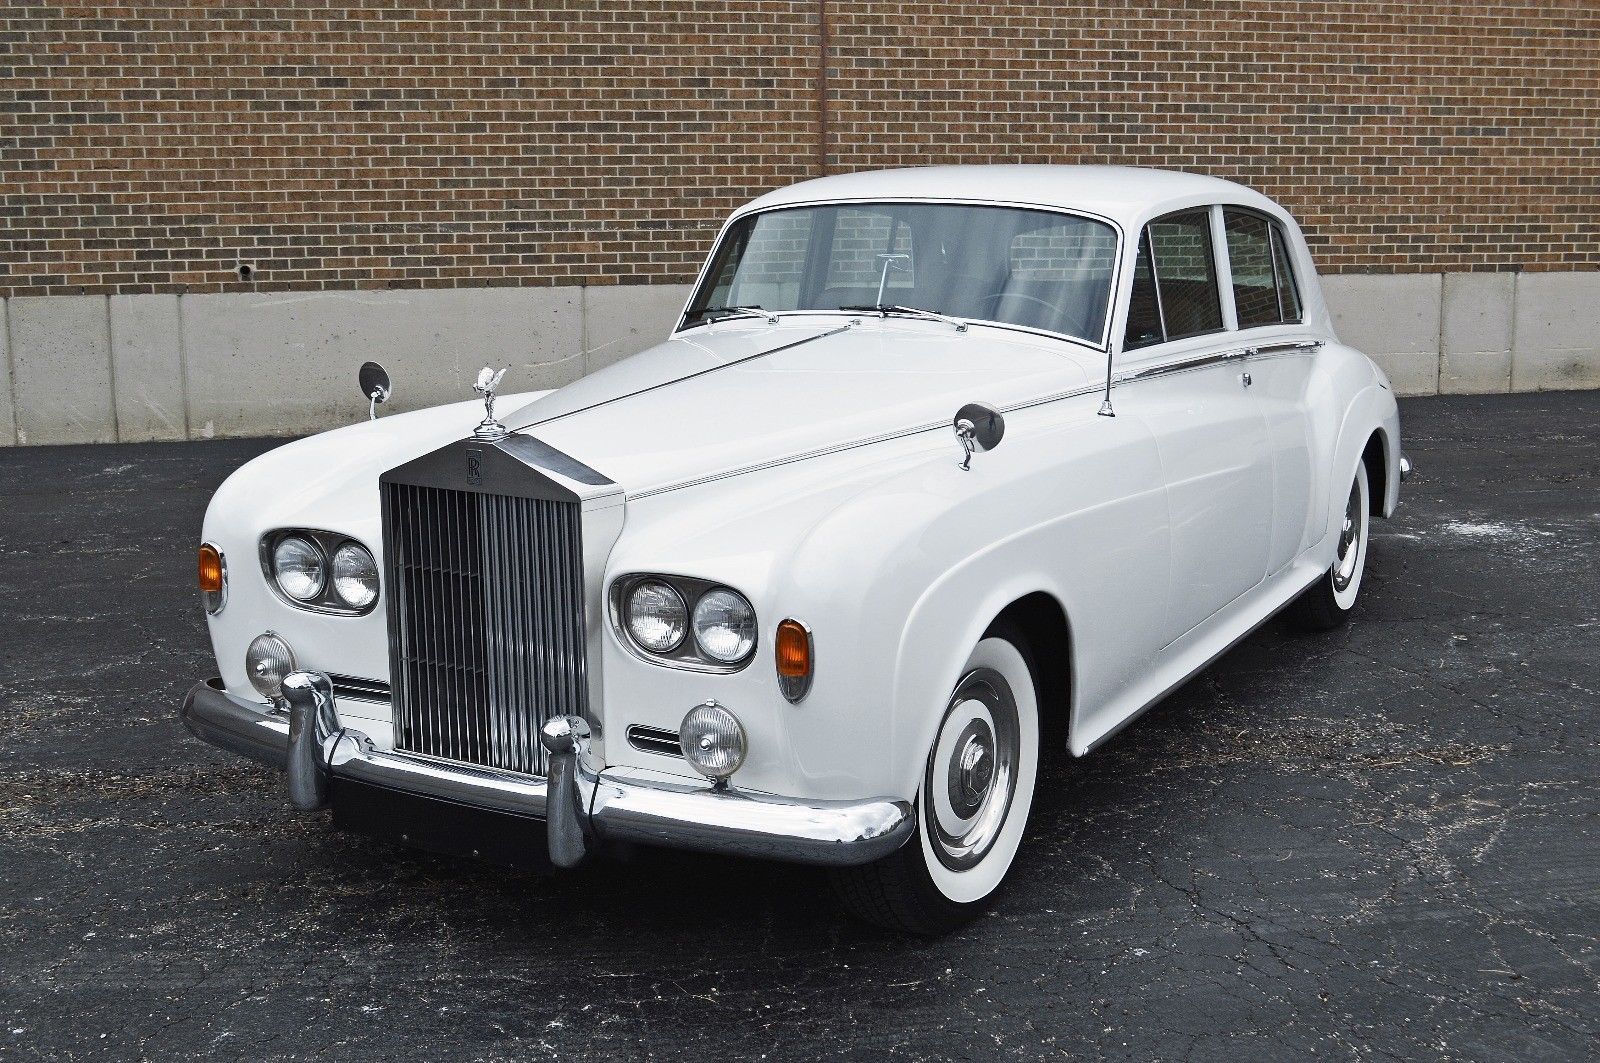 Simon Cowell's white Rolls-Royce Silver Cloud III parked next to wall